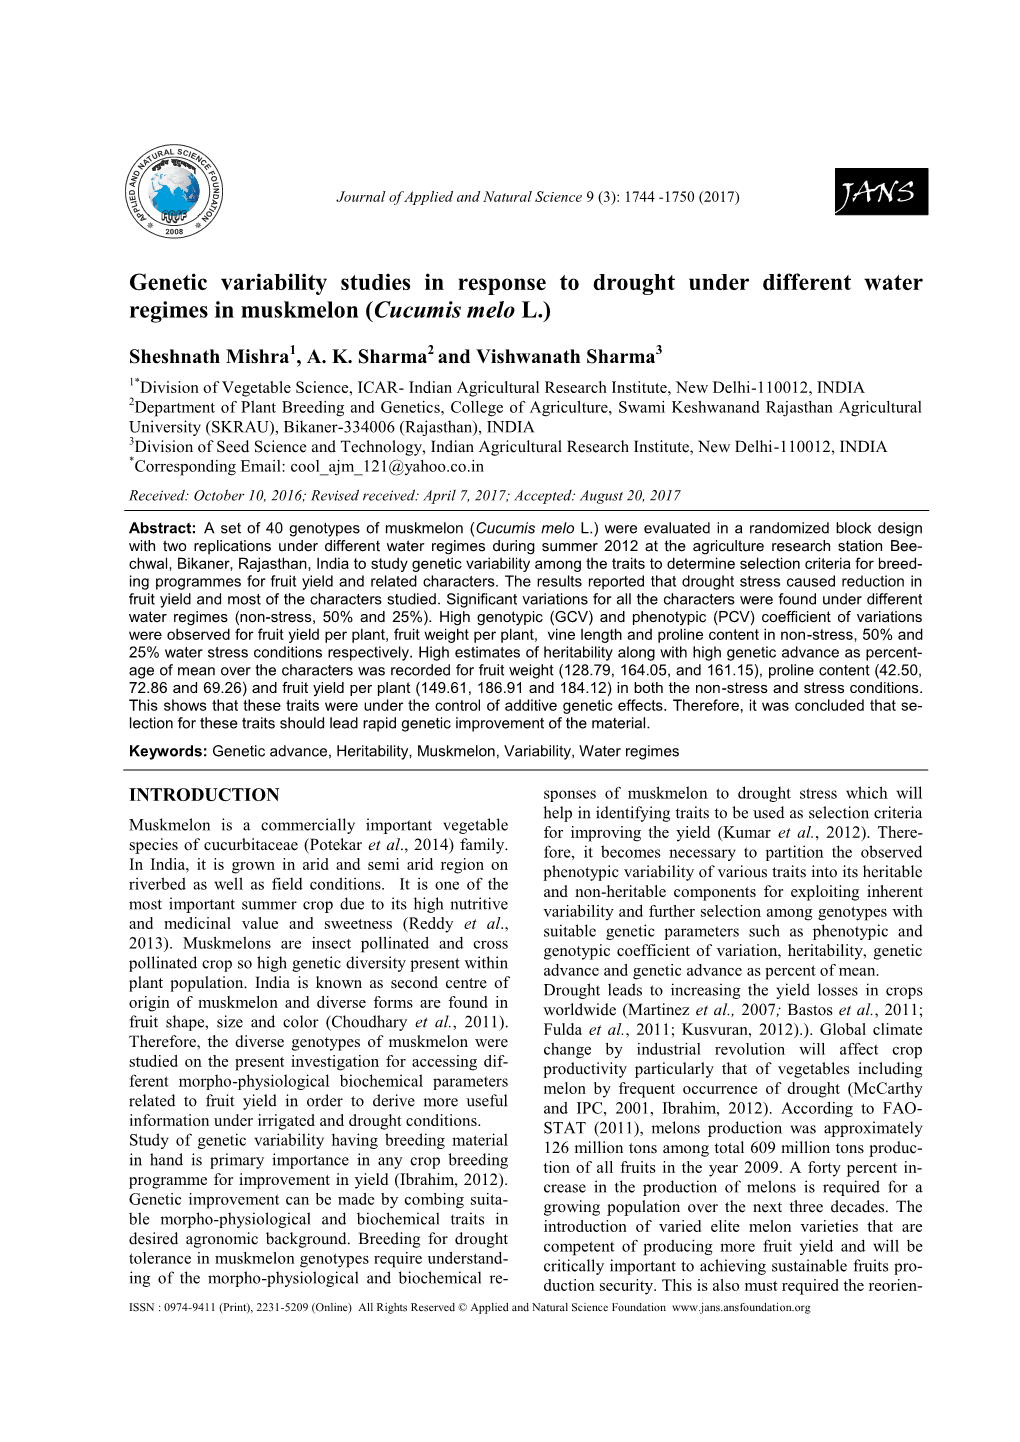 Genetic Variability Studies in Response to Drought Under Different Water Regimes in Muskmelon (Cucumis Melo L.)